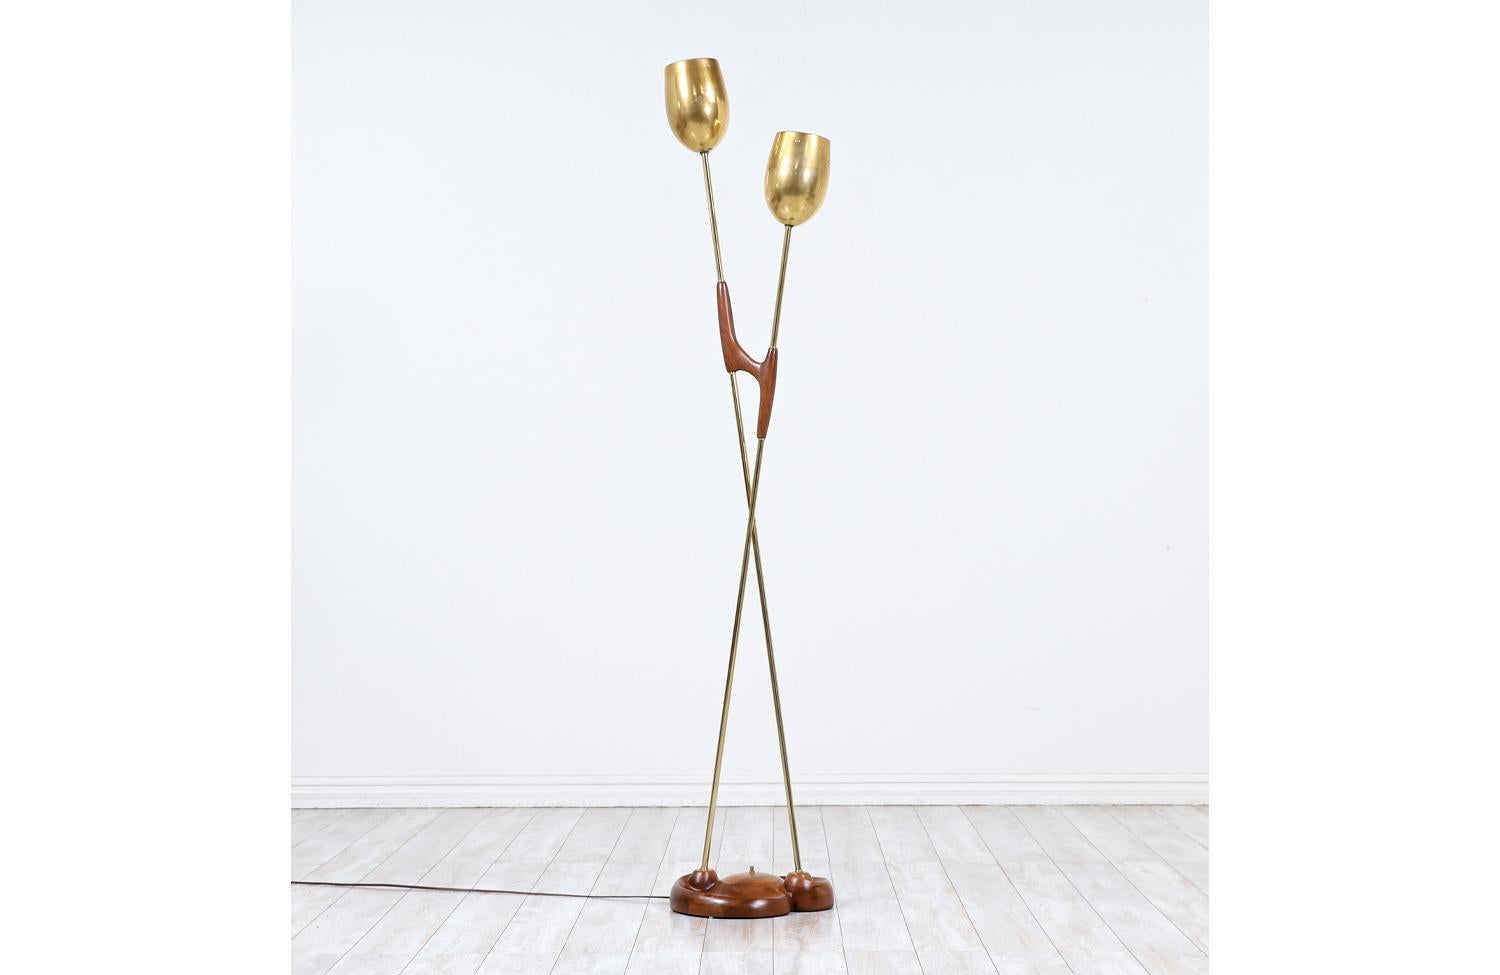 Mid-Century Modern Sculpted Walnut & Brass Torchier Floor Lamp

________________________________________

Transforming a piece of Mid-Century Modern furniture is like bringing history back to life, and we take this journey with passion and